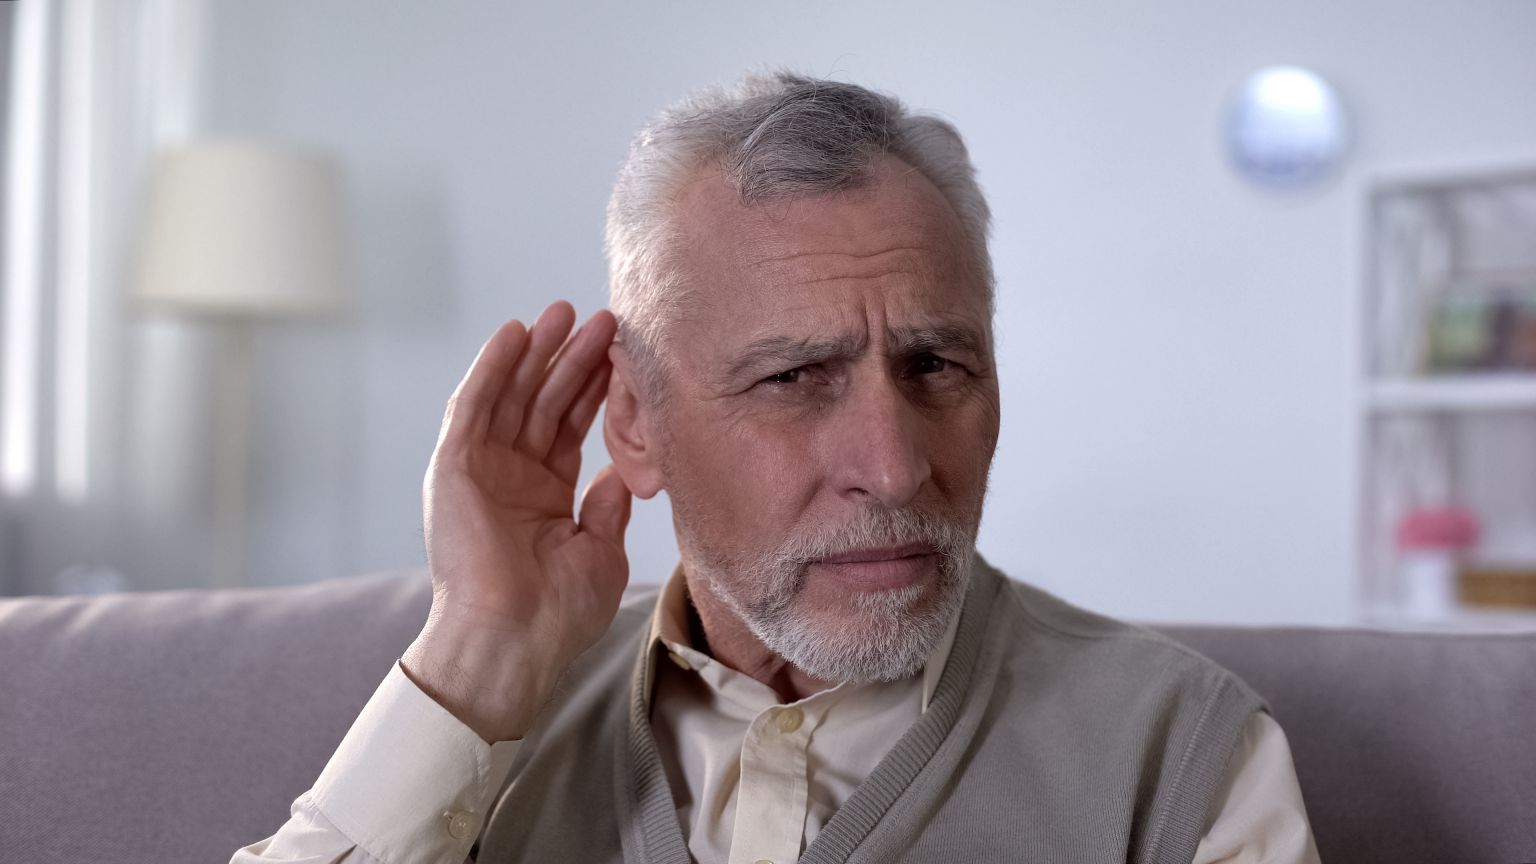 mans hearing aid not working and needs repairs